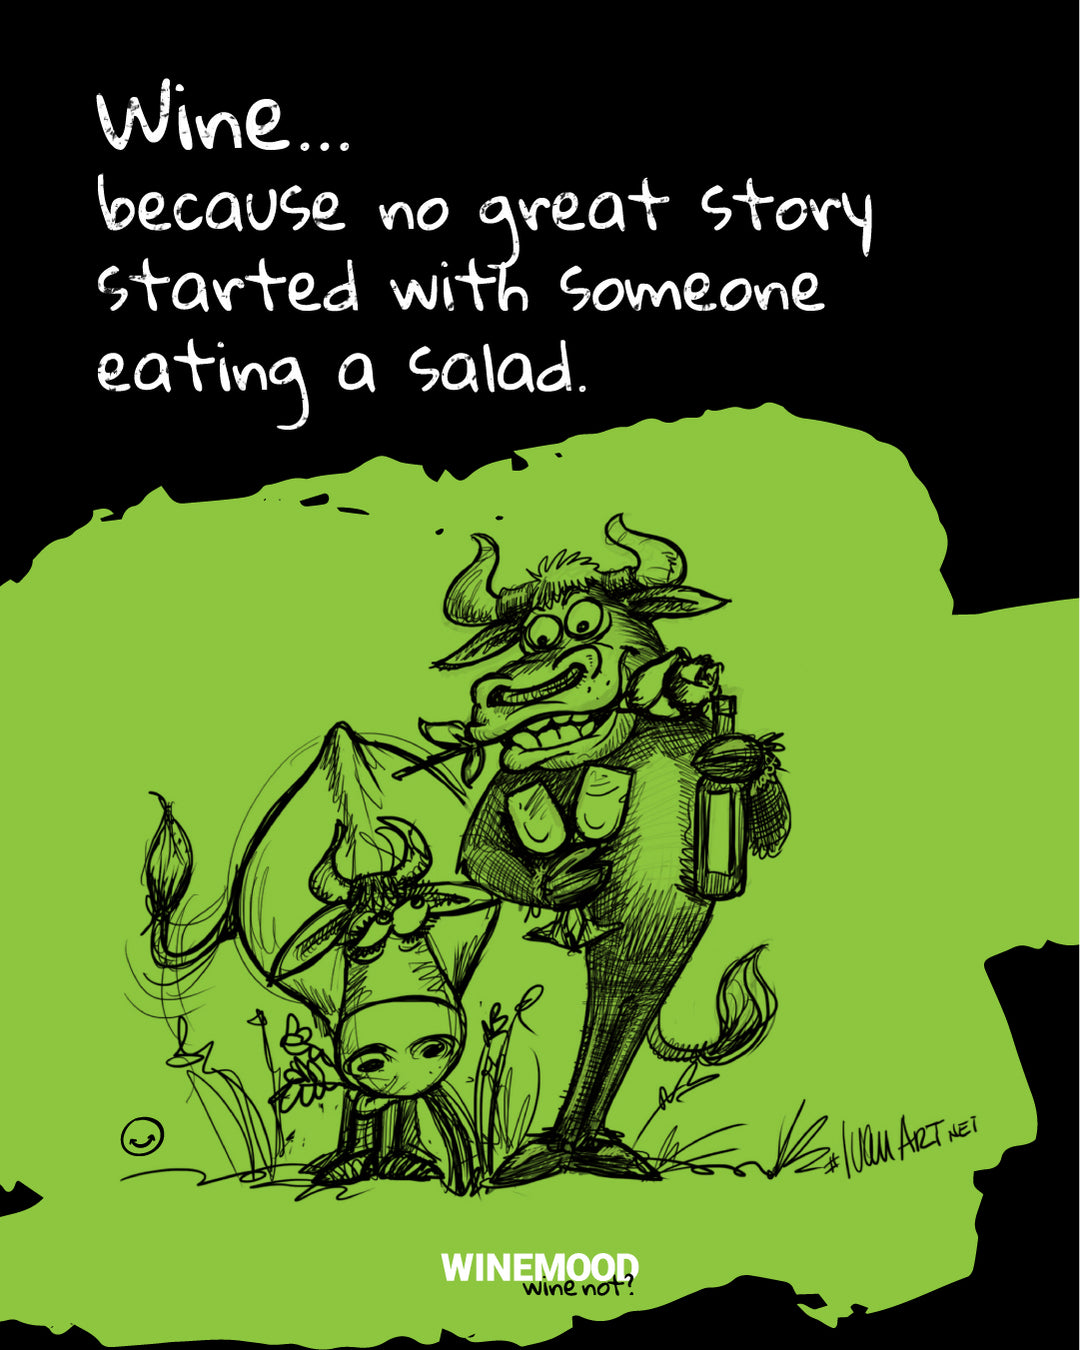 About salad